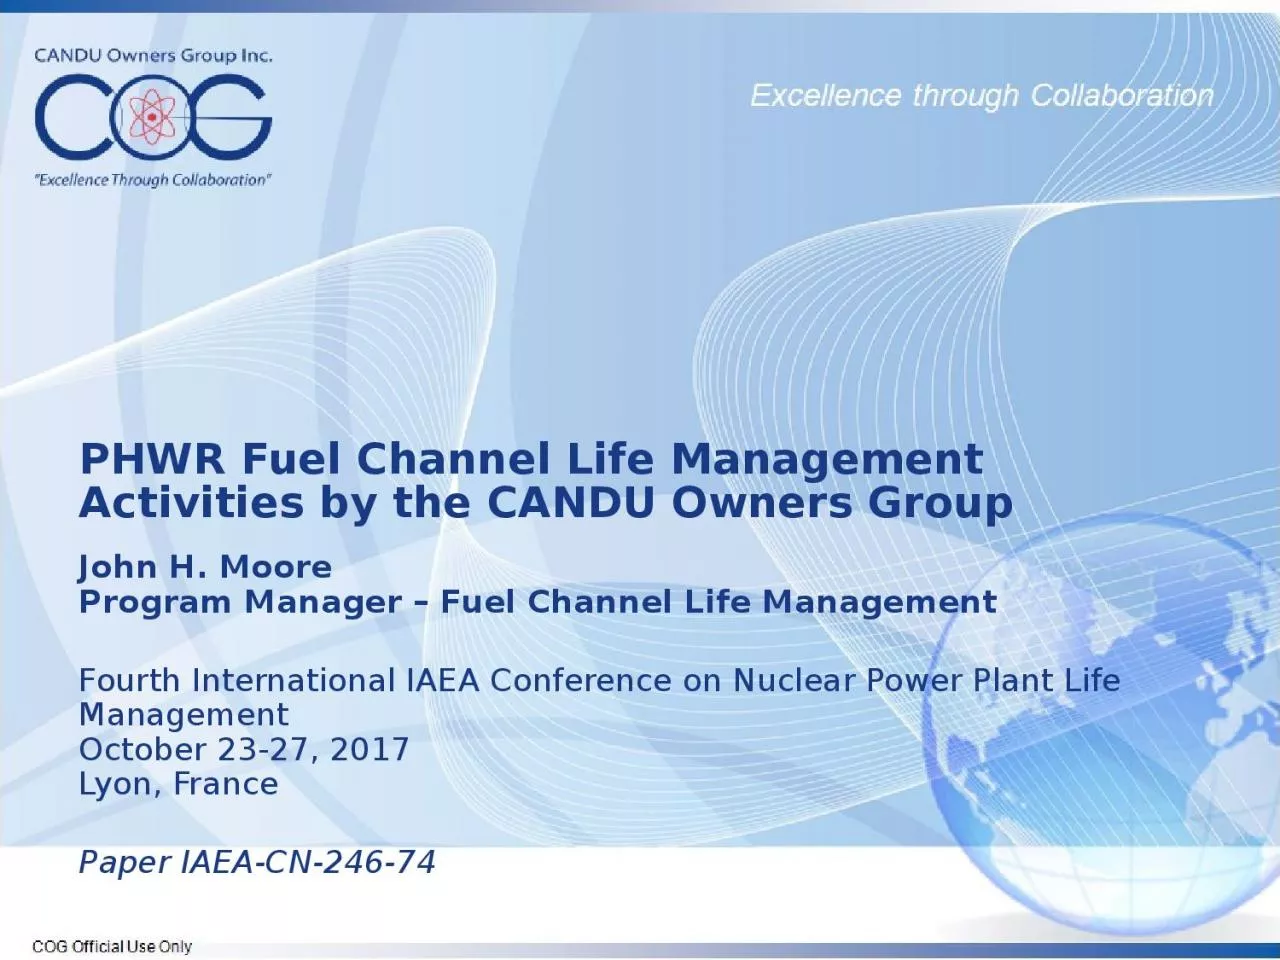 PHWR Fuel Channel Life Management Activities by the CANDU Owners Group